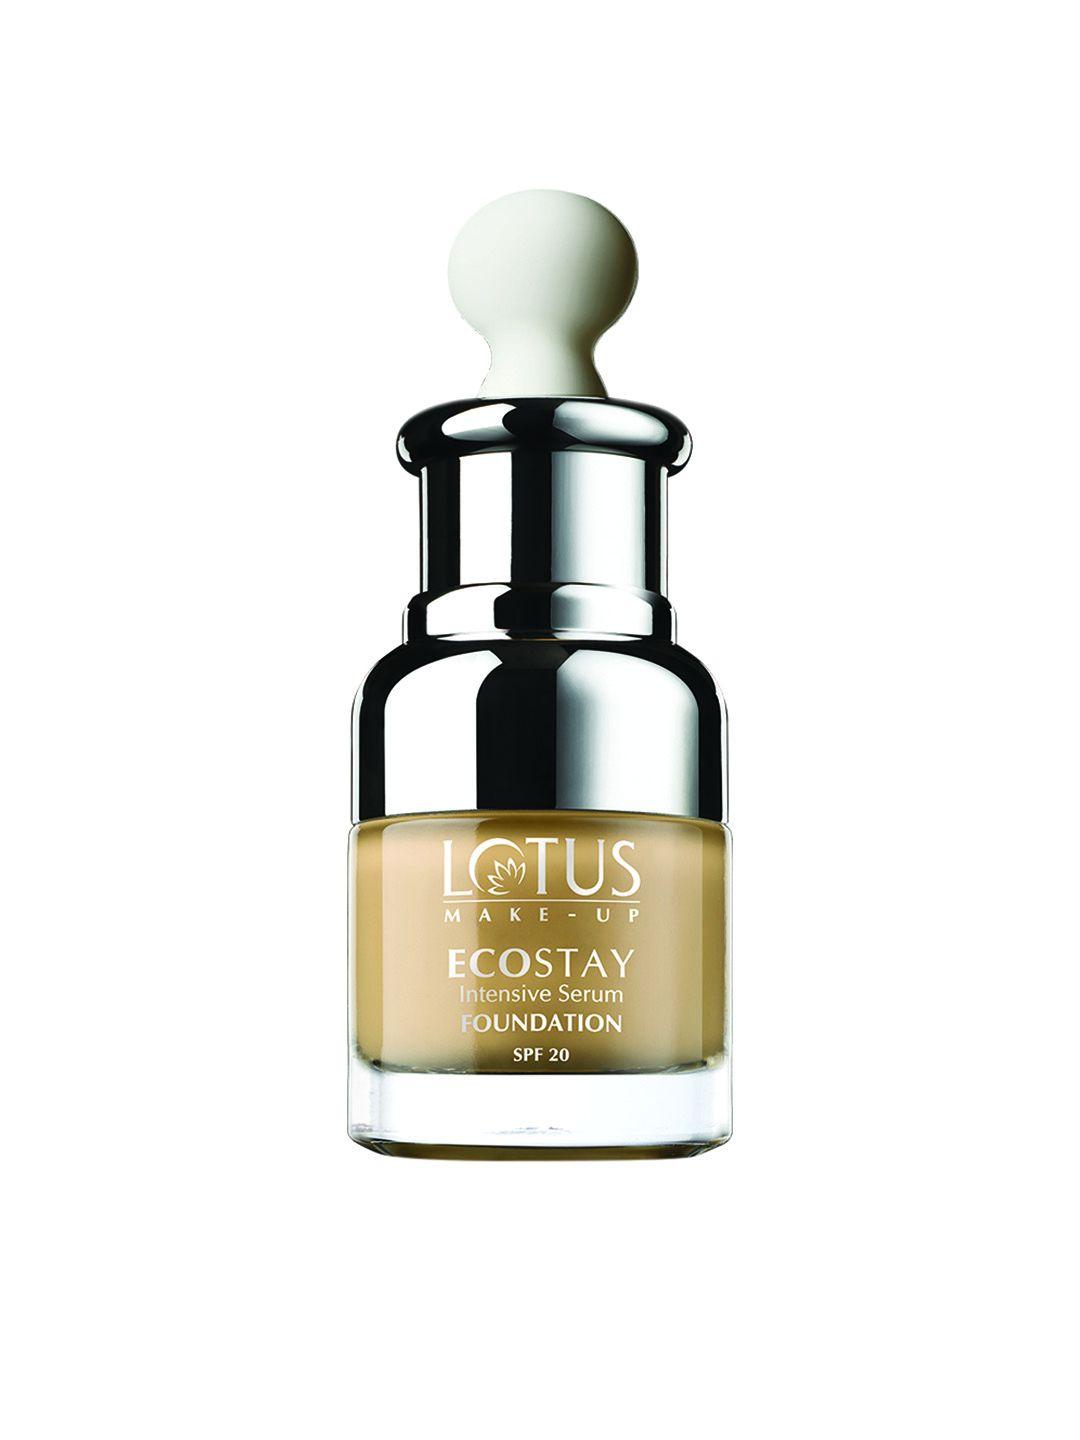 lotus herbals make-up ecostay spf 20 intensive serum foundation - ivory is03